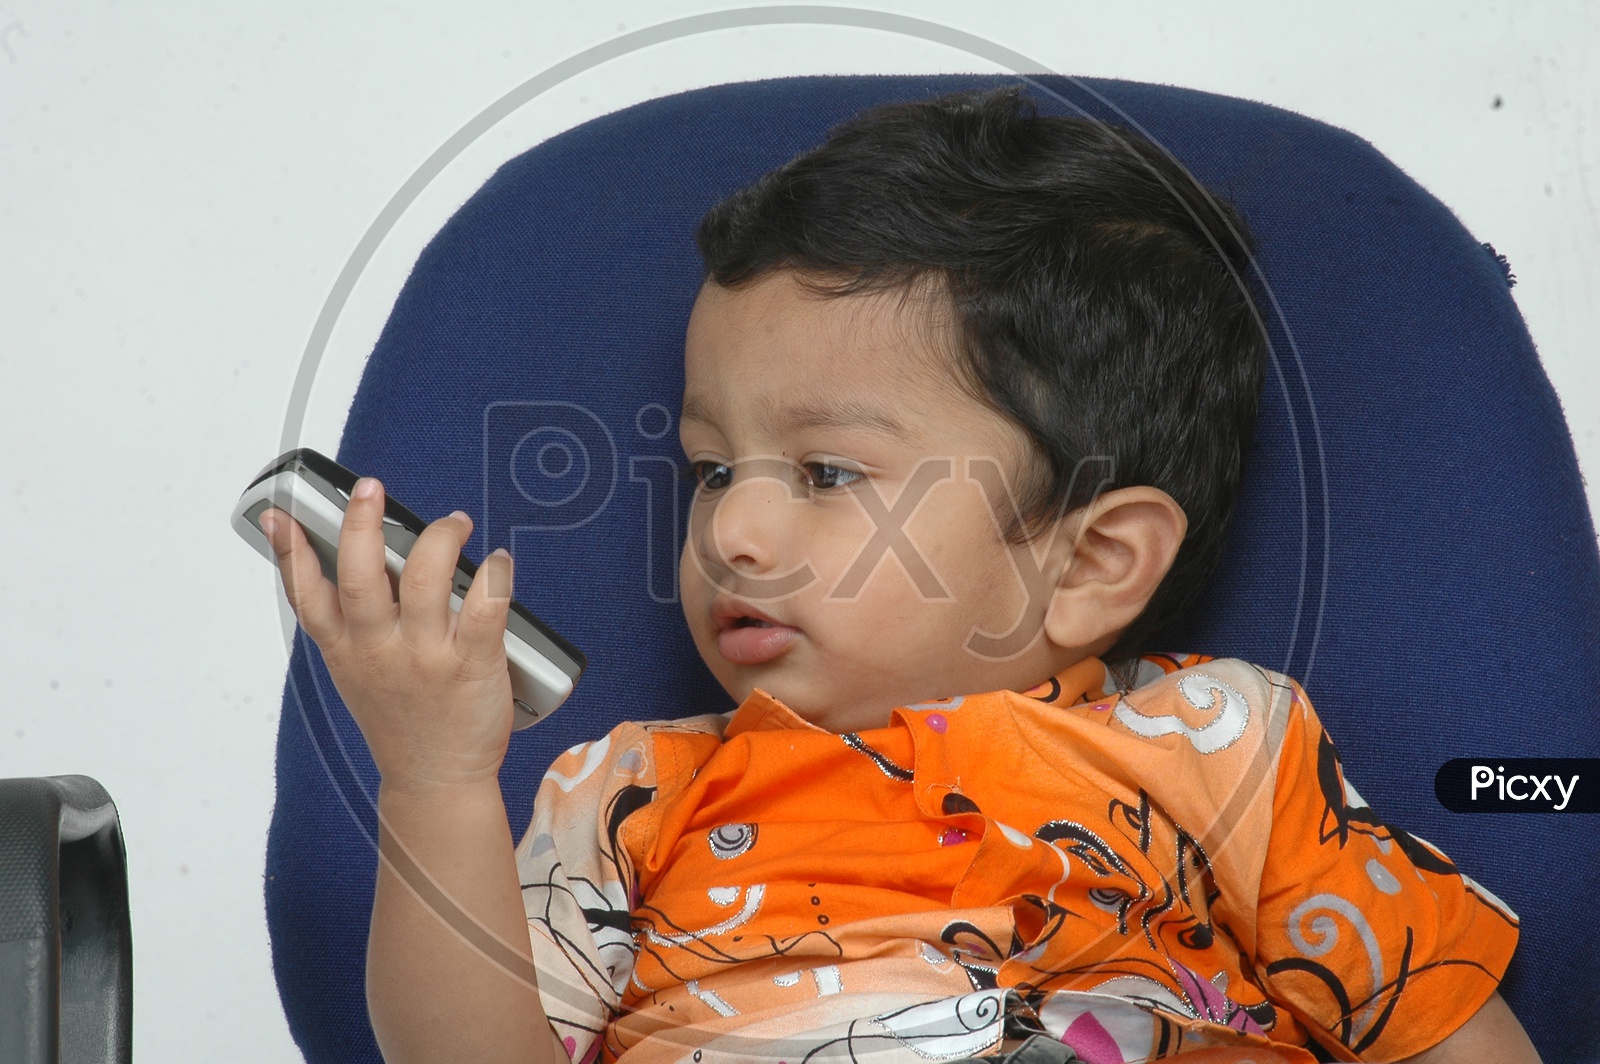 Indian Baby Boy Playing with Cellphone Closeup Shot On an Isolated White Background